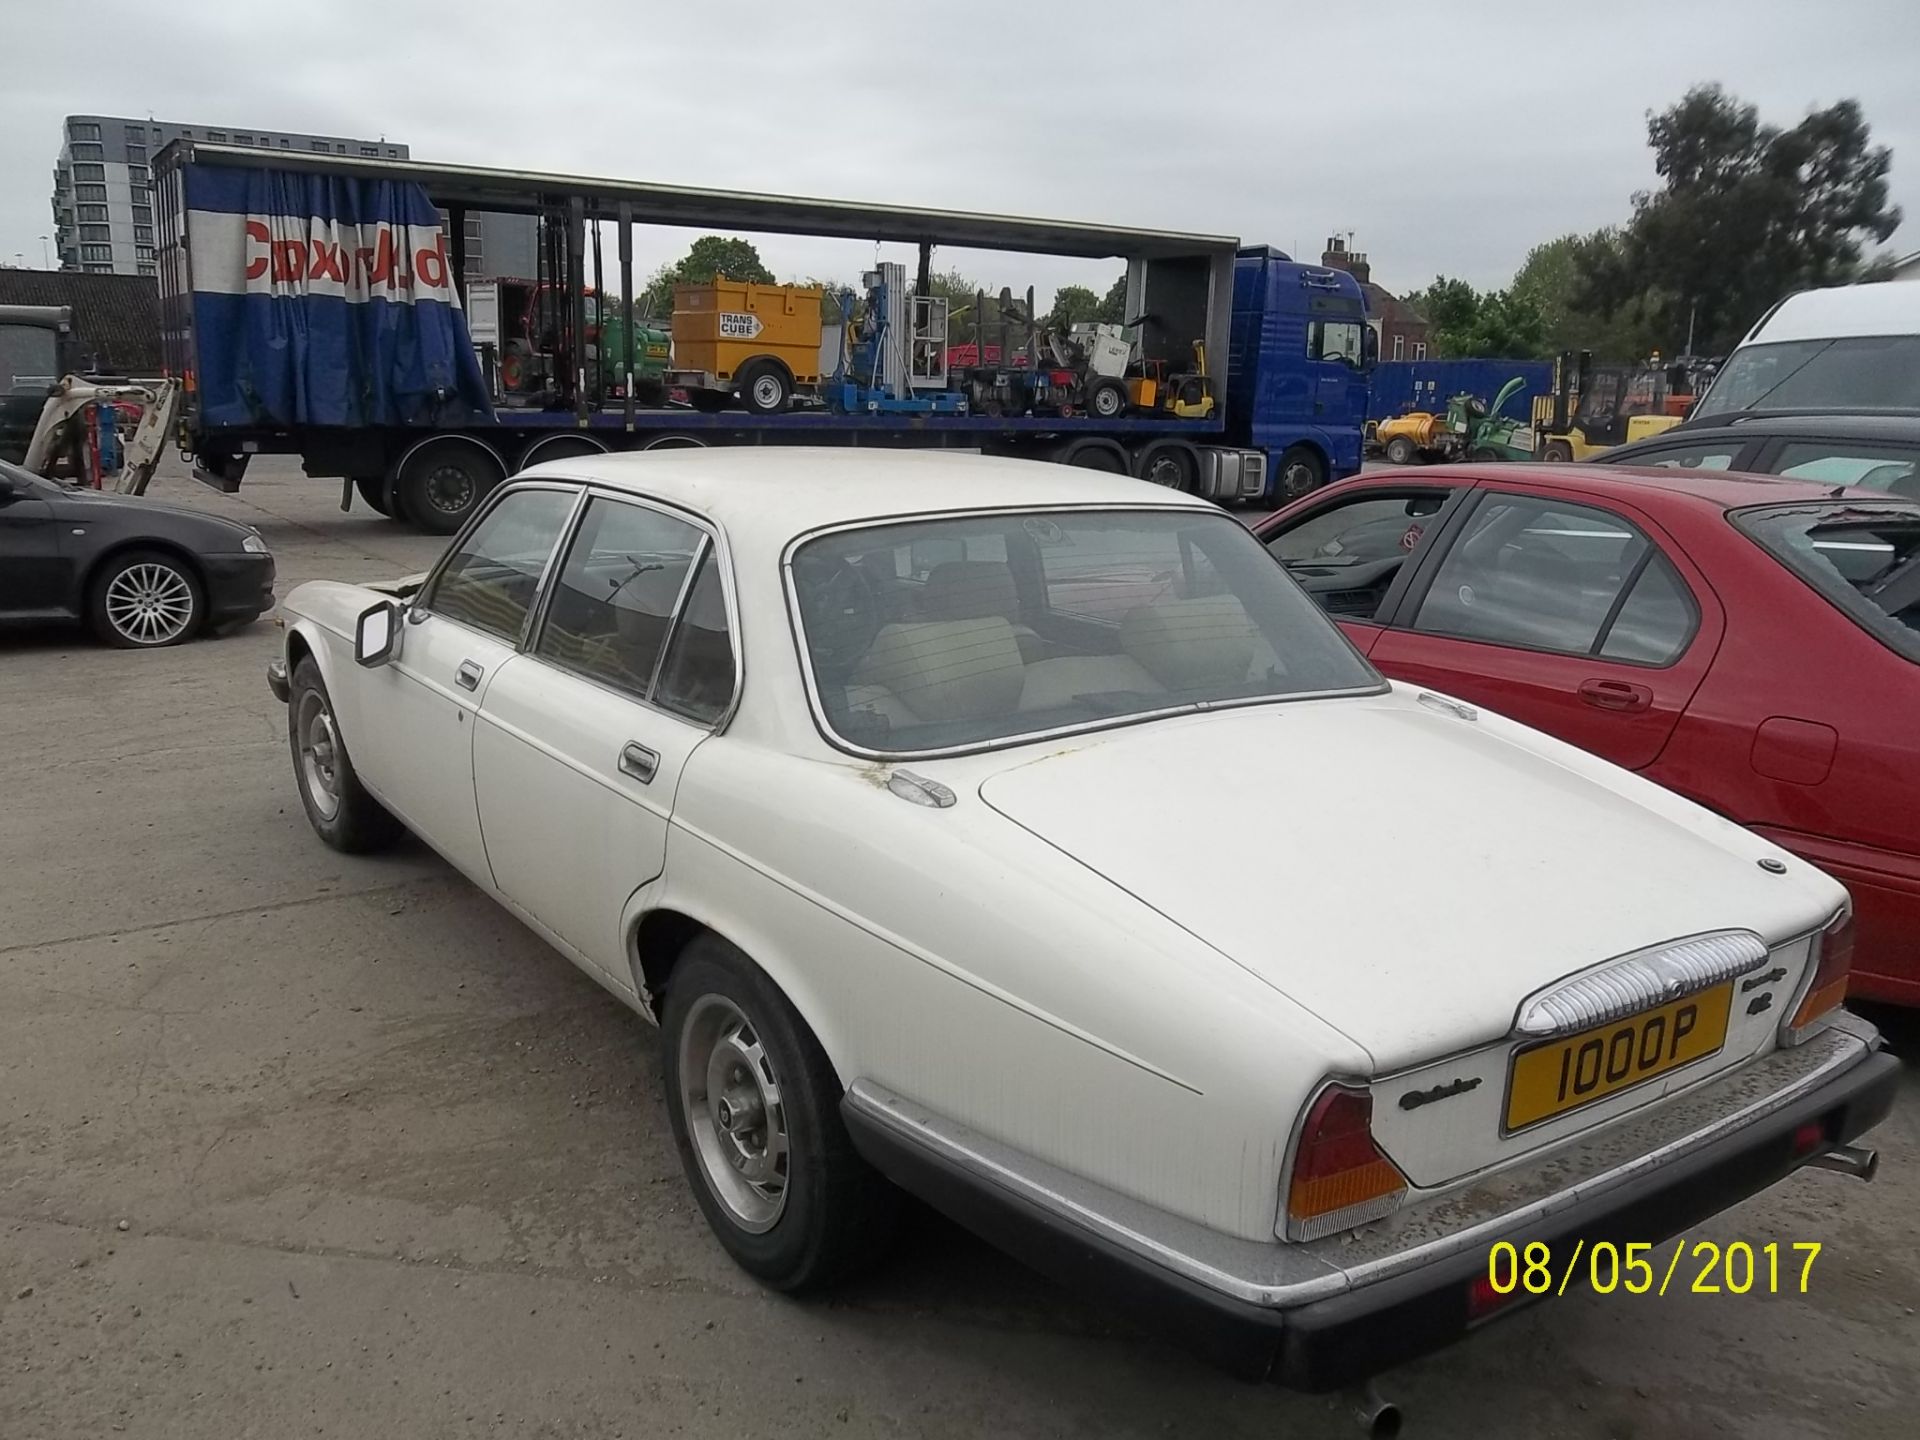 Daimler 4.2 Sovereign - 100 OP Date of registration: 01.01.1980 4235cc, petrol, automatic, white - Image 4 of 4